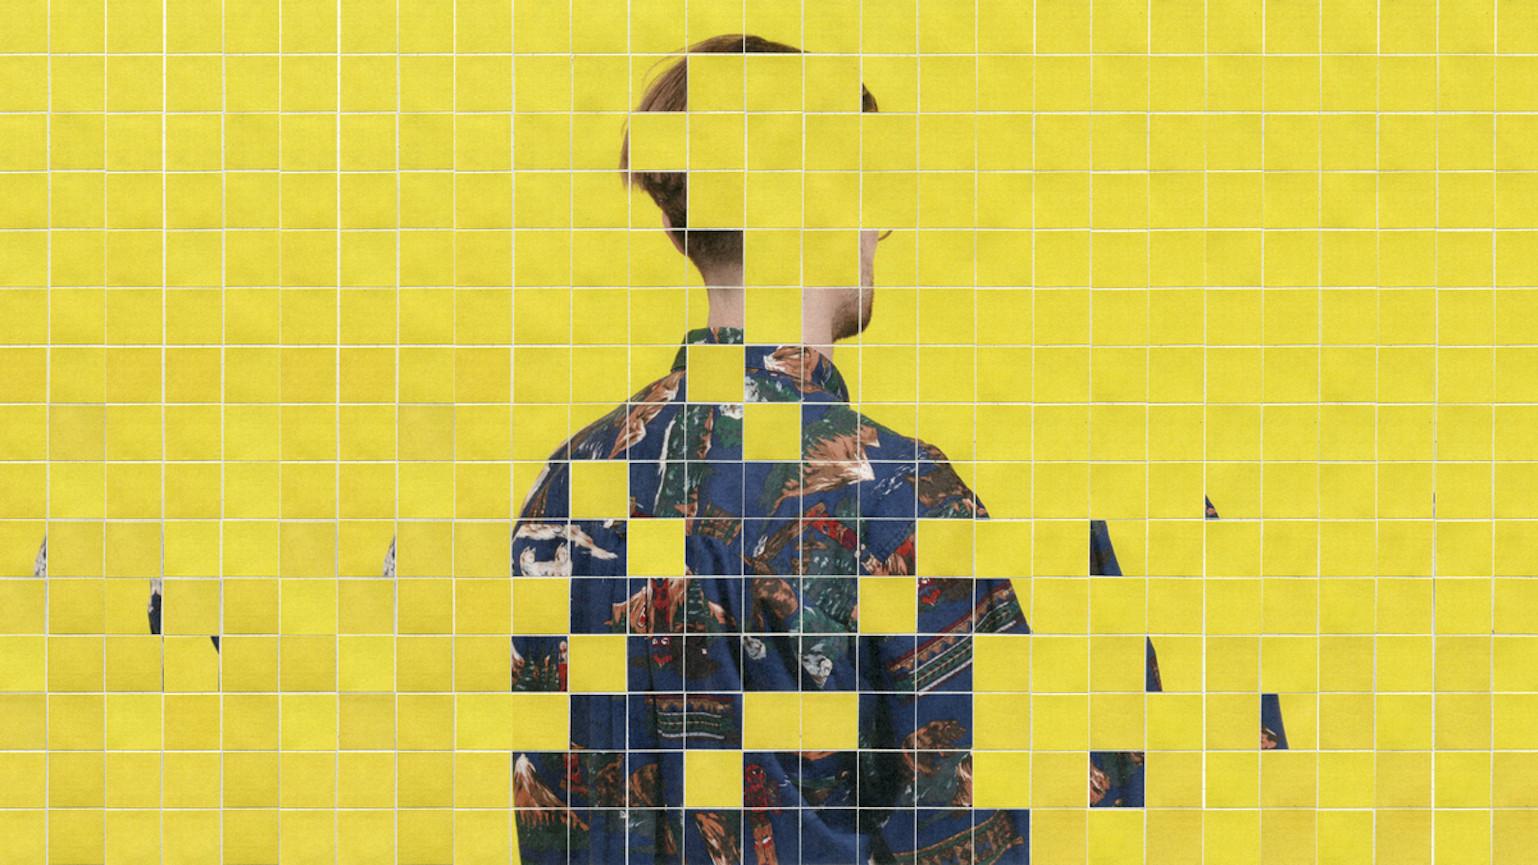 A wall with yellow tiles. Some of the tiles are missing revealing an image of a man facing away.